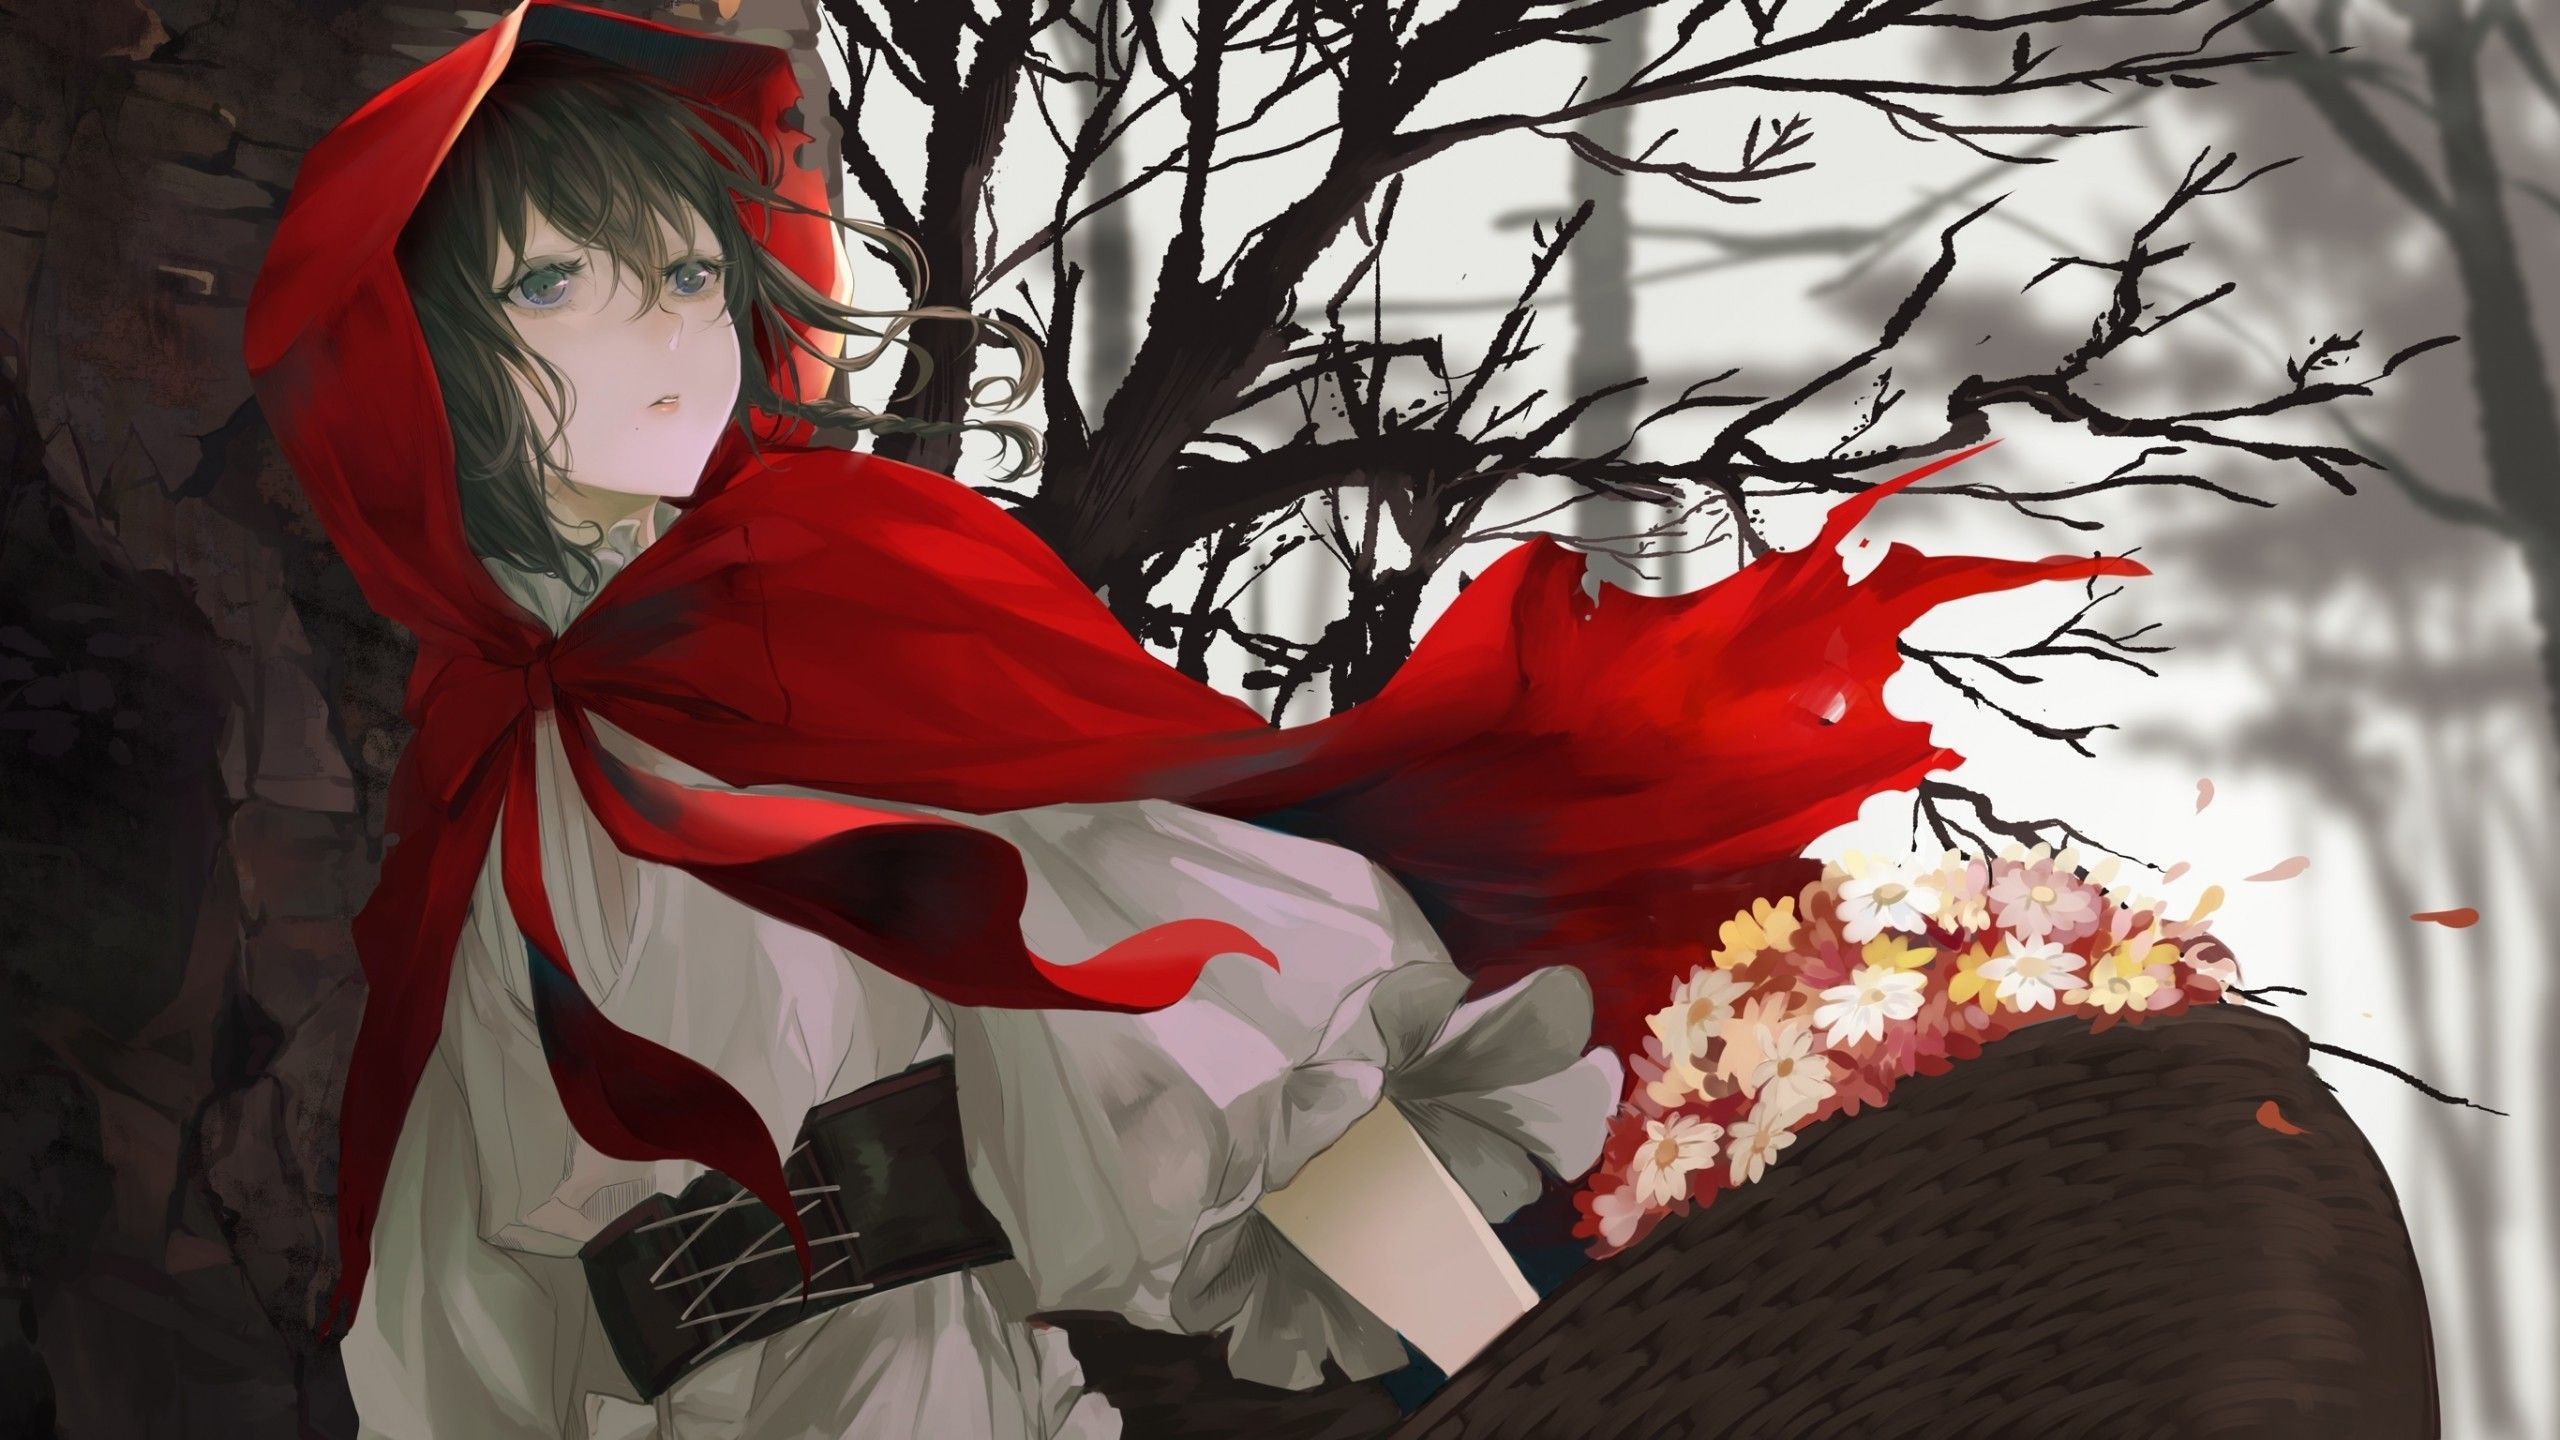 Download 2560x1440 Little Red Riding Hood, Anime Girl, Flowers Wallpaper for iMac 27 inch